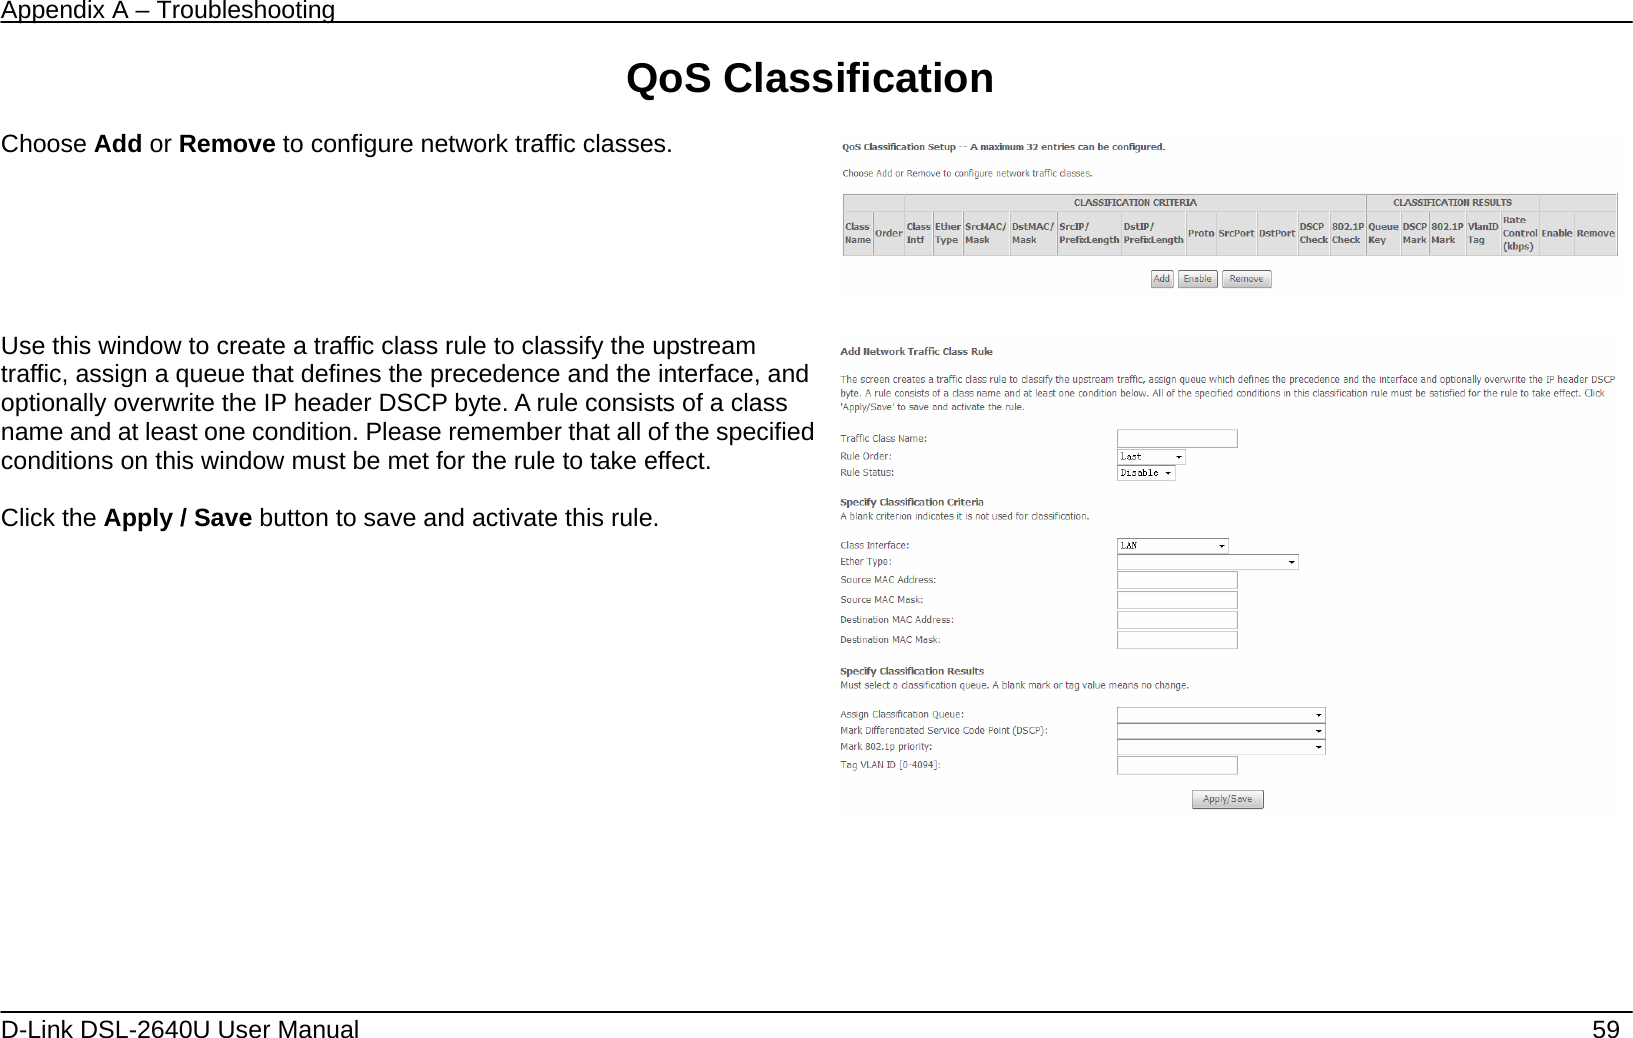 Appendix A – Troubleshooting   D-Link DSL-2640U User Manual    59 QoS Classification  Choose Add or Remove to configure network traffic classes.       Use this window to create a traffic class rule to classify the upstream traffic, assign a queue that defines the precedence and the interface, and optionally overwrite the IP header DSCP byte. A rule consists of a class name and at least one condition. Please remember that all of the specified conditions on this window must be met for the rule to take effect.  Click the Apply / Save button to save and activate this rule.       